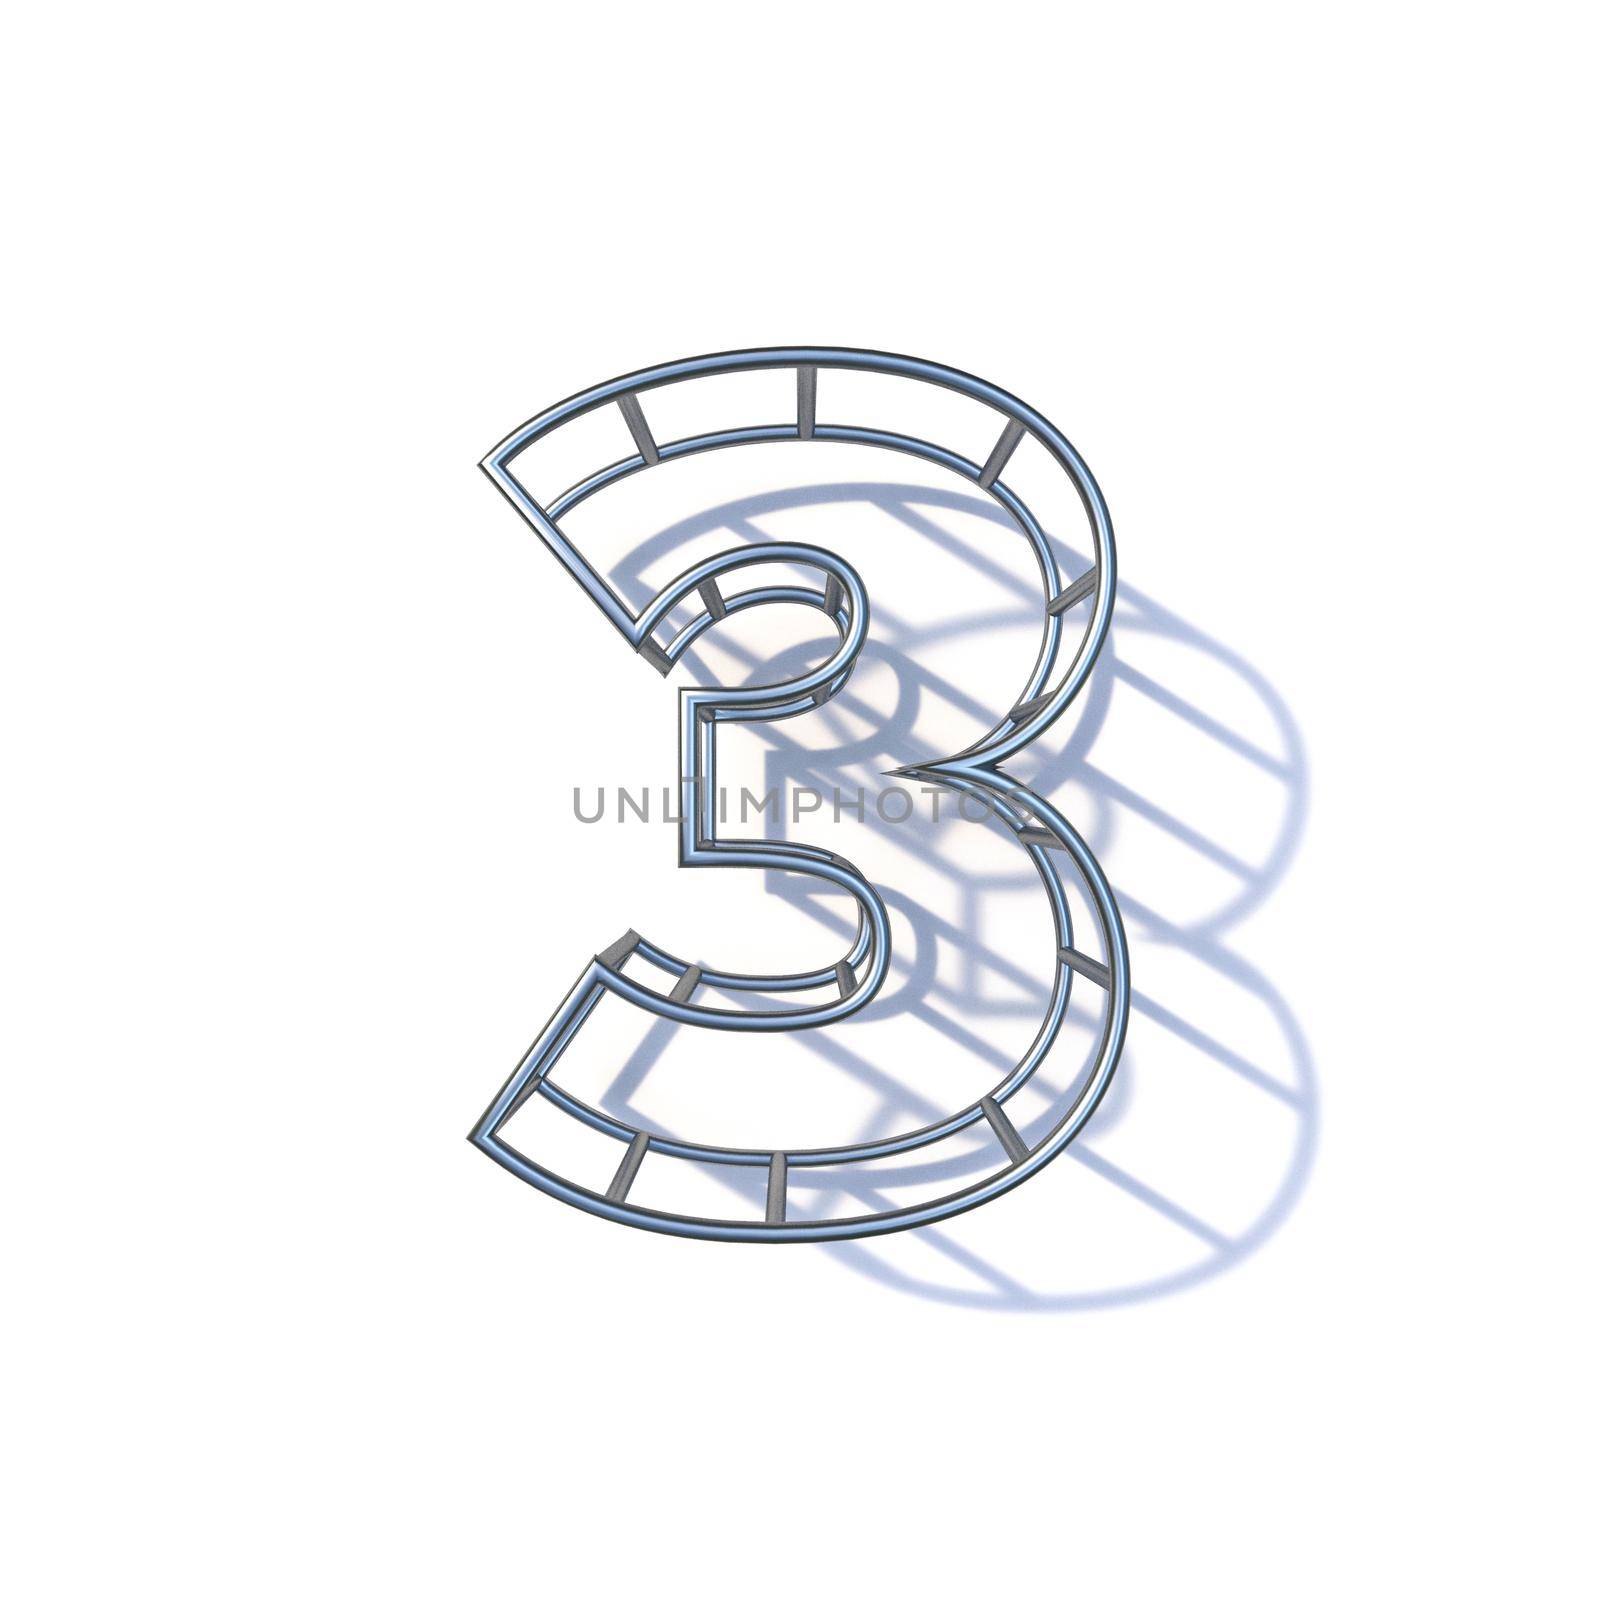 Steel wire frame font Number 3 THREE 3D render illustration isolated on white background